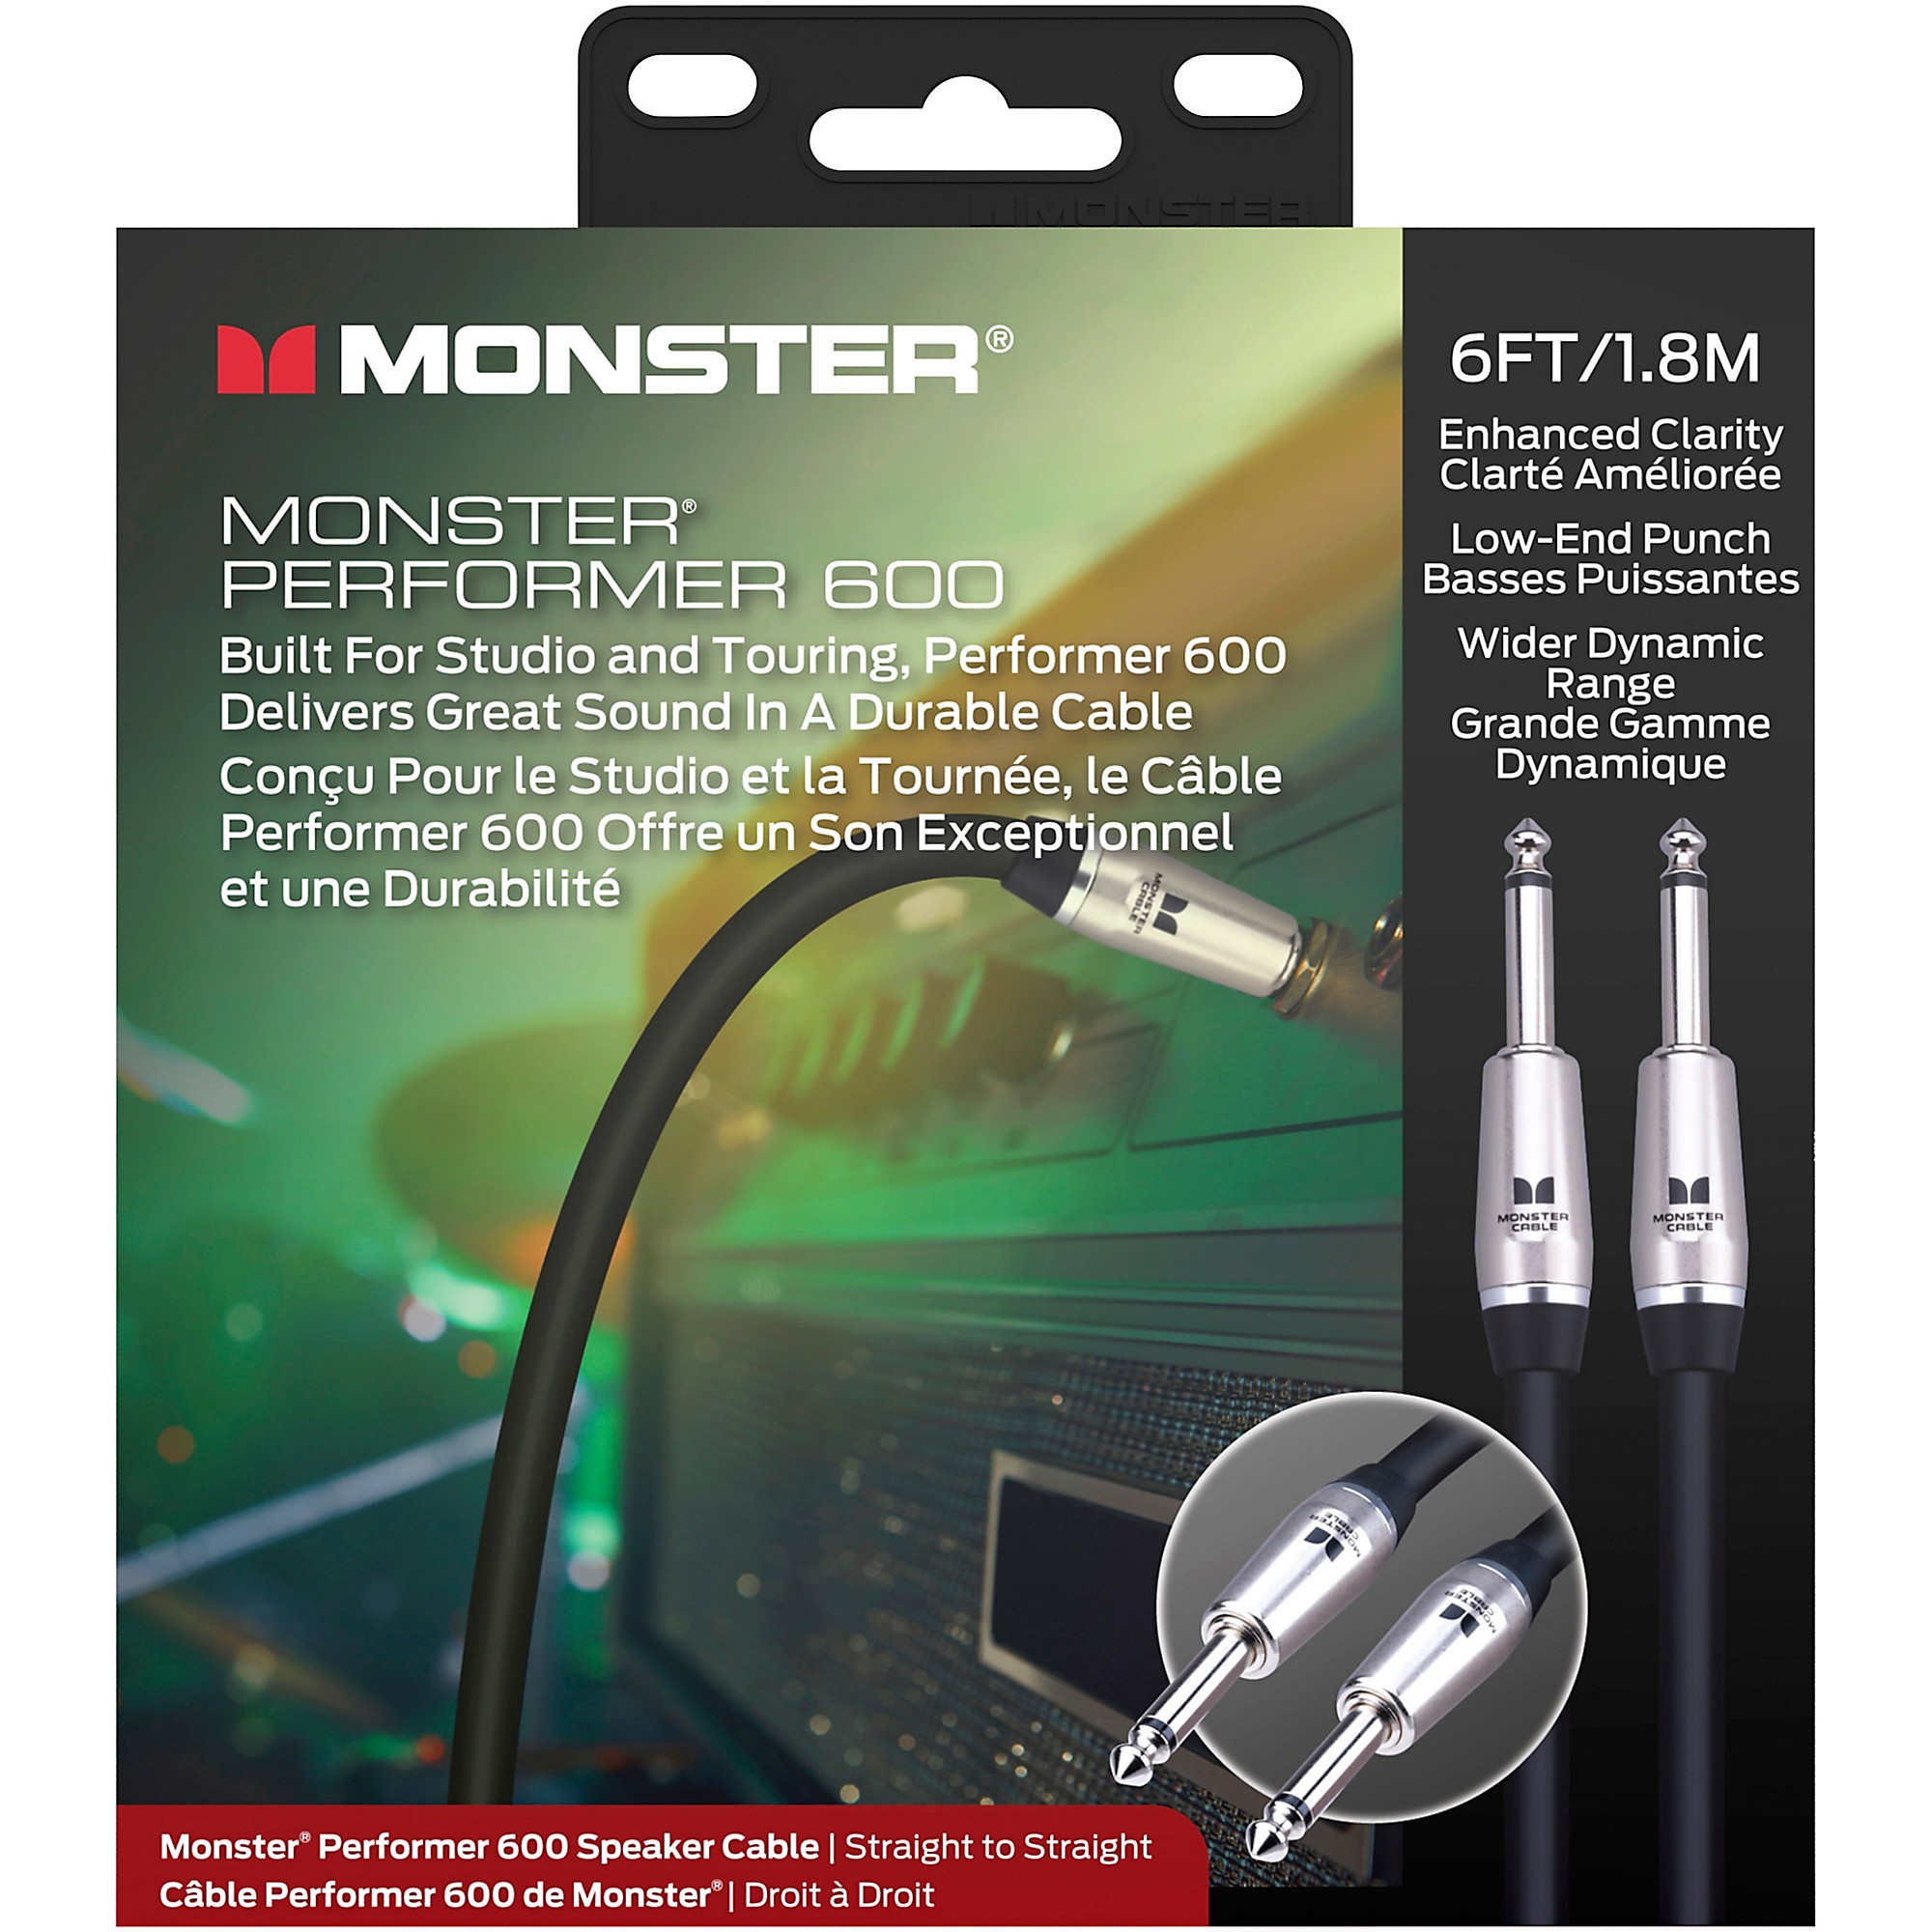 Monster Prolink Performer 600 Speaker Cable Straight 1/4 inch Plugs, 30 